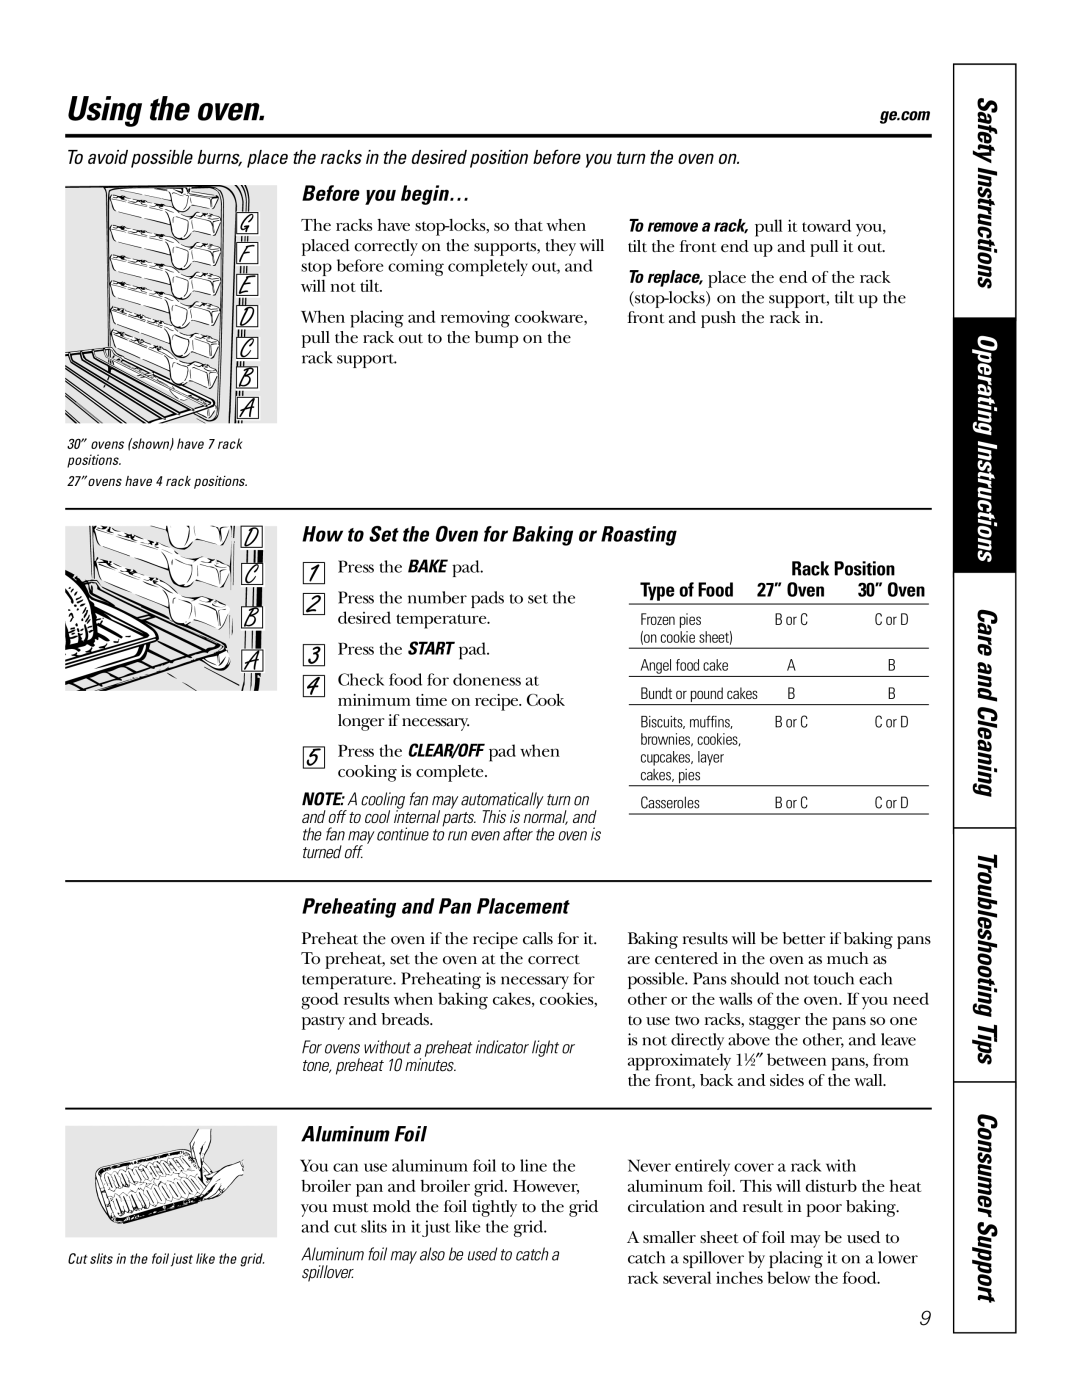 GE JK95527 Using the oven, Care and Cleaning, Before you begin…, How to Set the Oven for Baking or Roasting, Aluminum Foil 